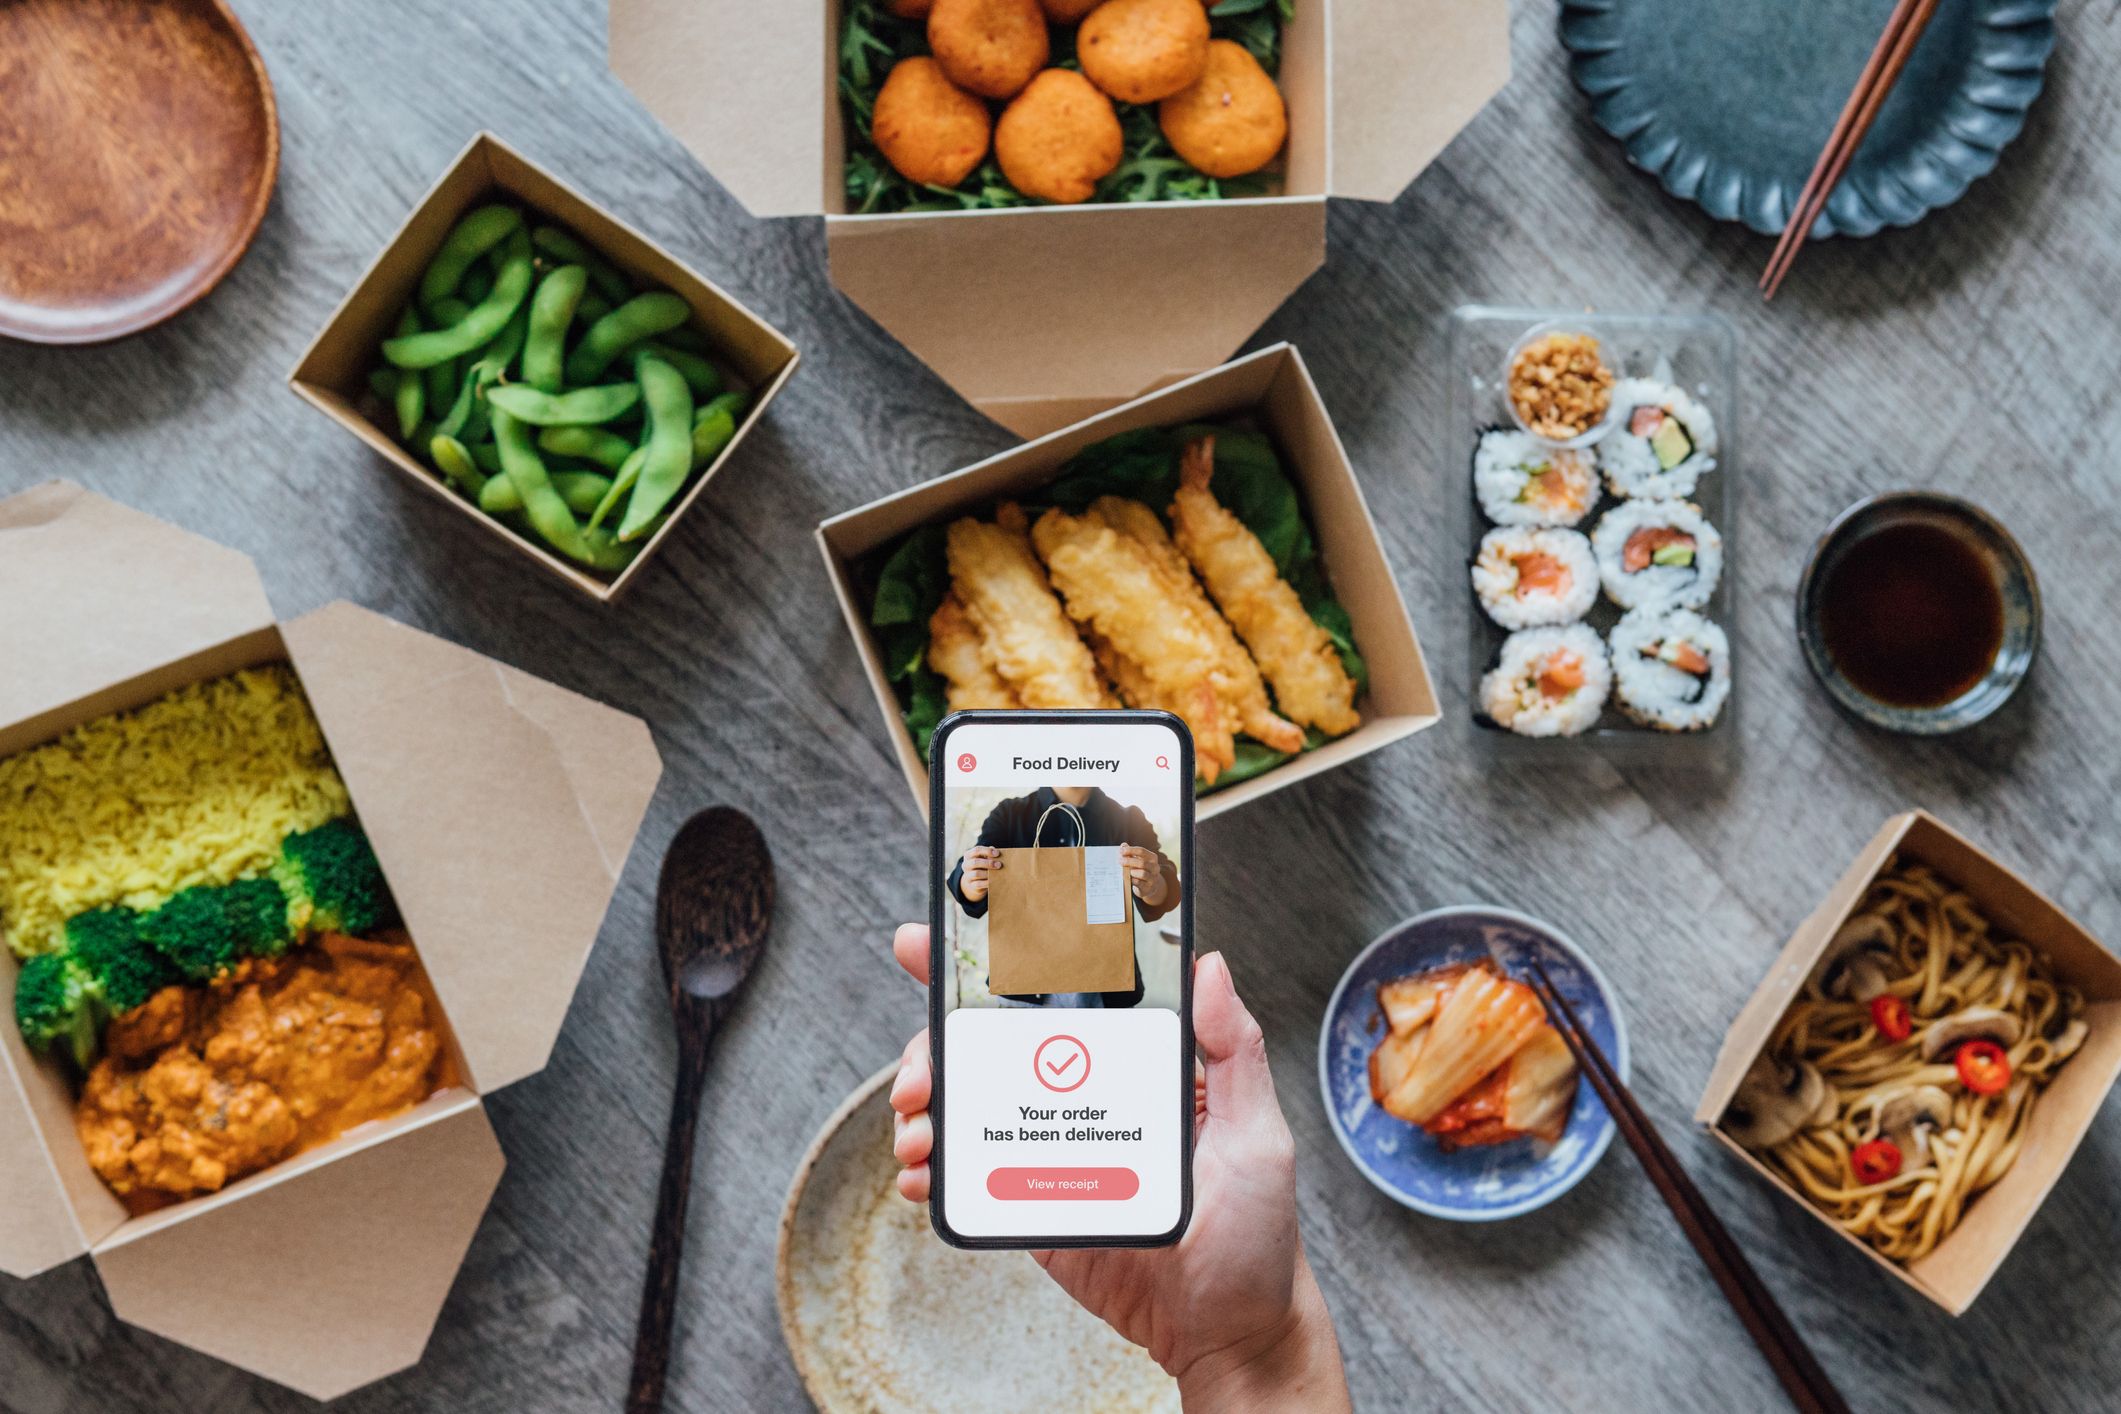 Applebee's - Fast Restaurant Food Delivery Near You